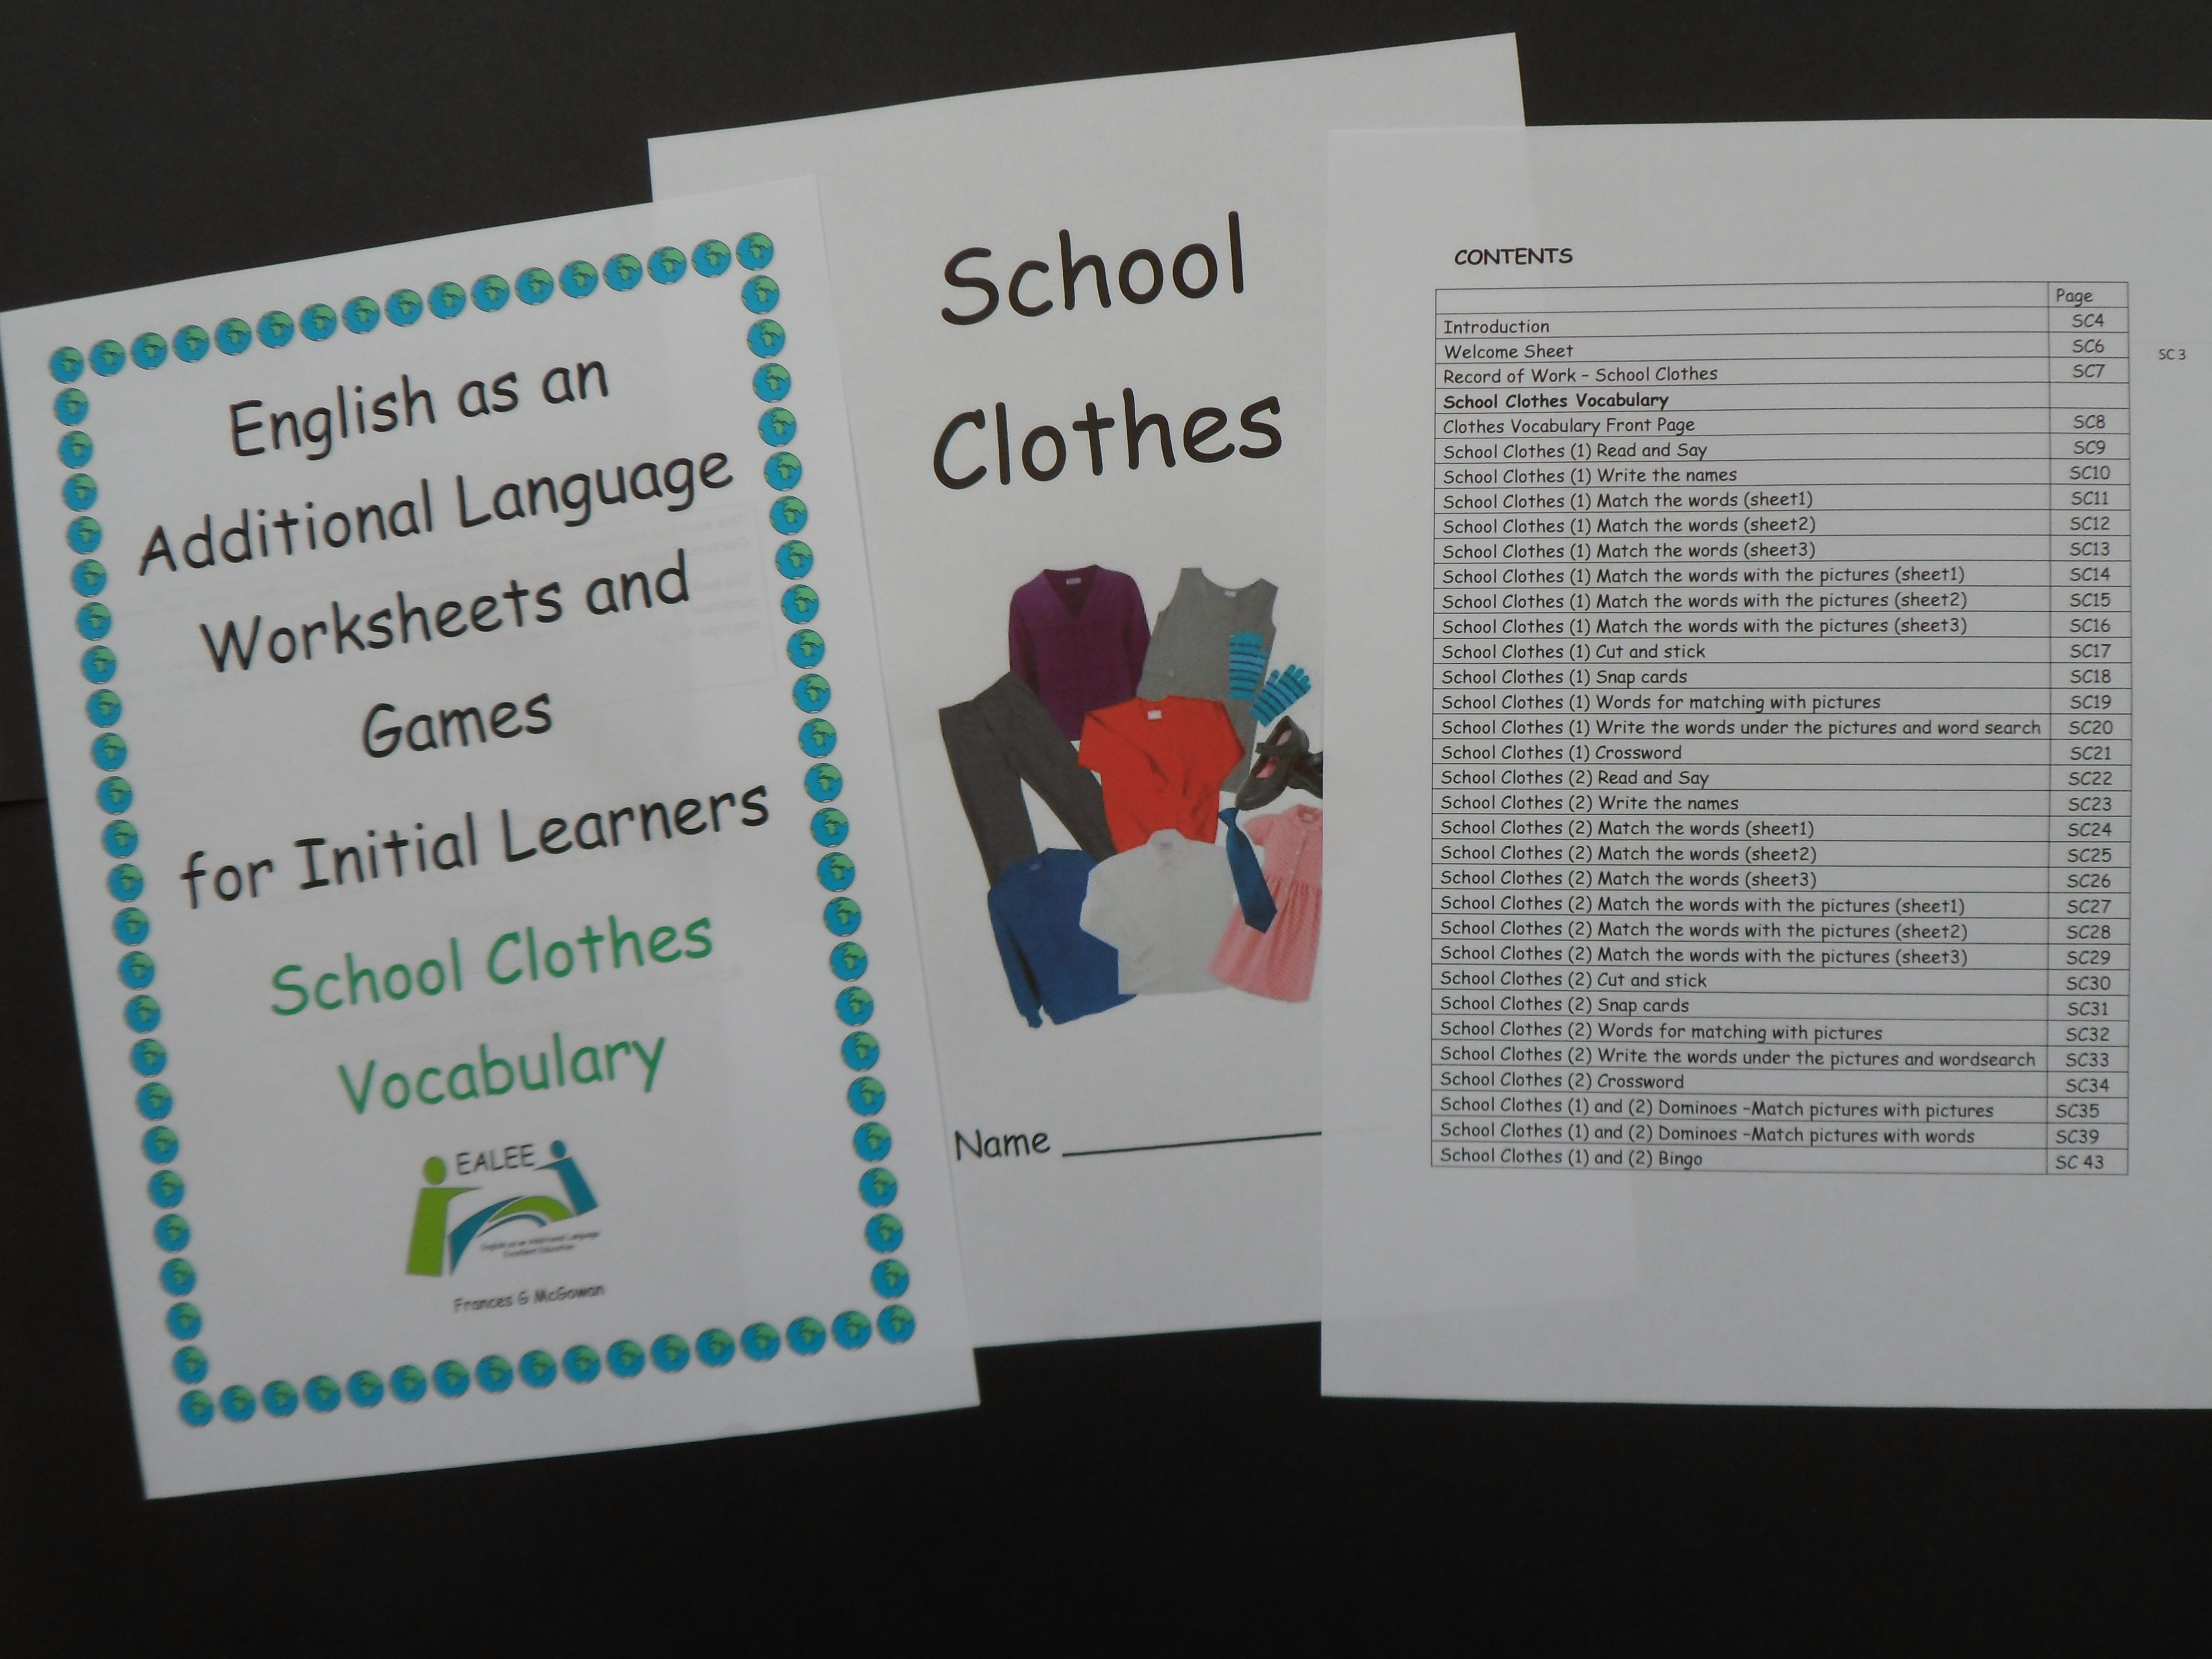 EAL/ESL Worksheets and Games for Initial Learners School Clothes Vocabulary